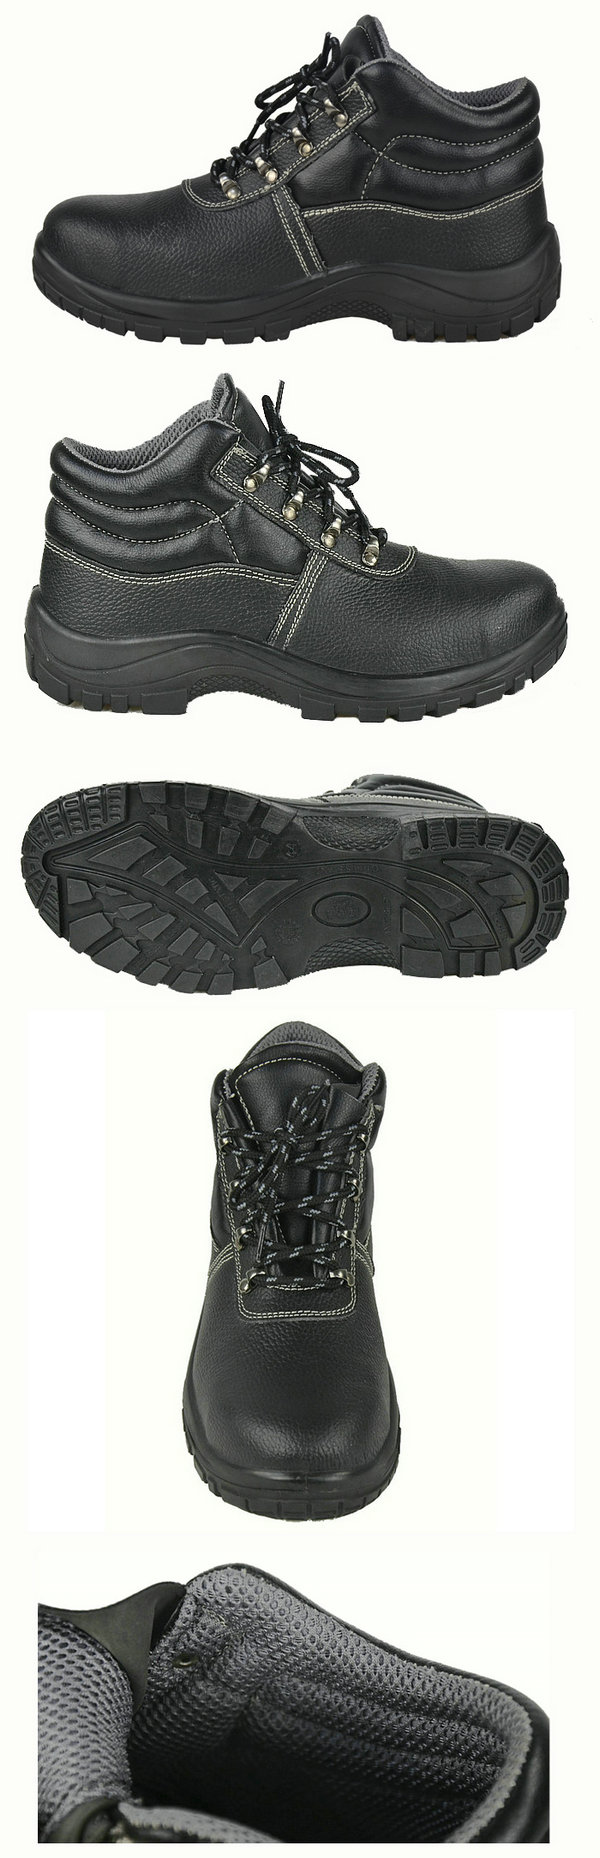 Classic Design Steel Toe Cap and Steel Midsole Safety shoes